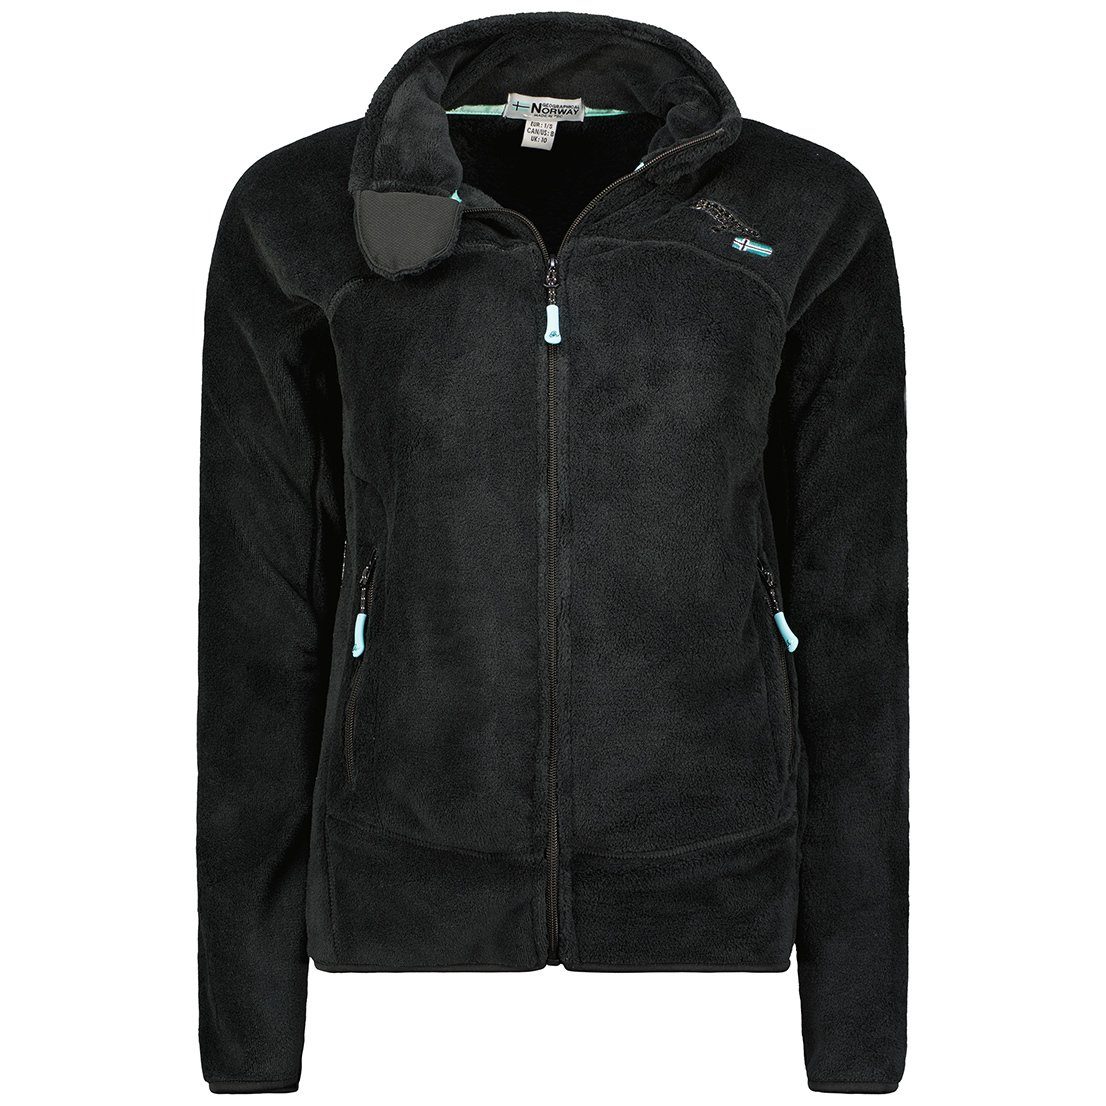 Schwarz LADY Norway / QUES Black Fleecejacke Turquoise Geographical -